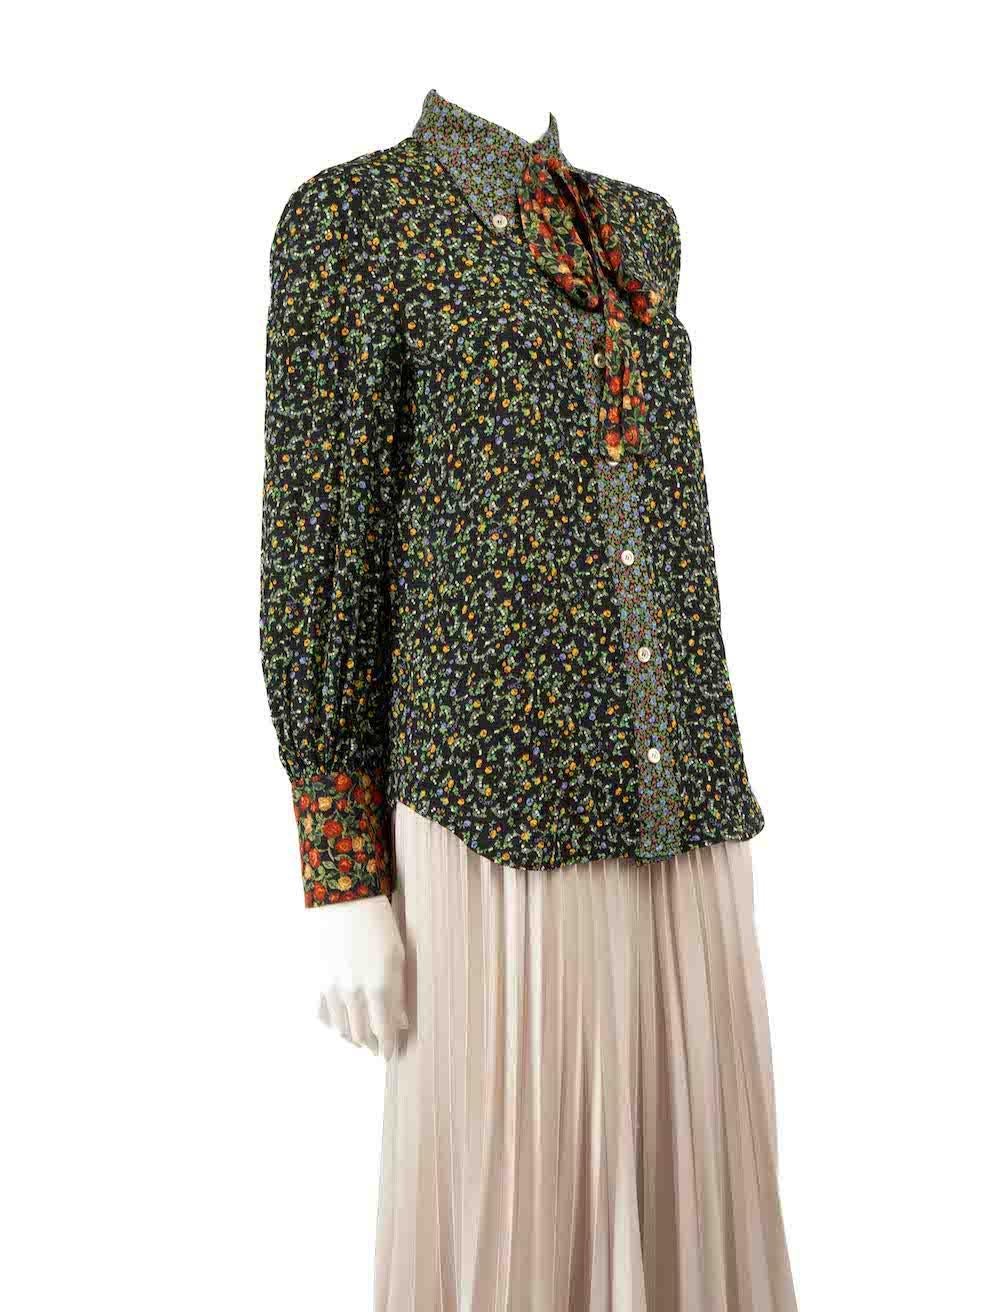 CONDITION is Very good. Hardly any visible wear to shirt is evident on this used Gucci designer resale item.
 
 
 
 Details
 
 
 Multicolour- Black tone
 
 Viscose
 
 Long sleeves blouse
 
 Liberty floral print
 
 Front button up closure
 
 Pussy